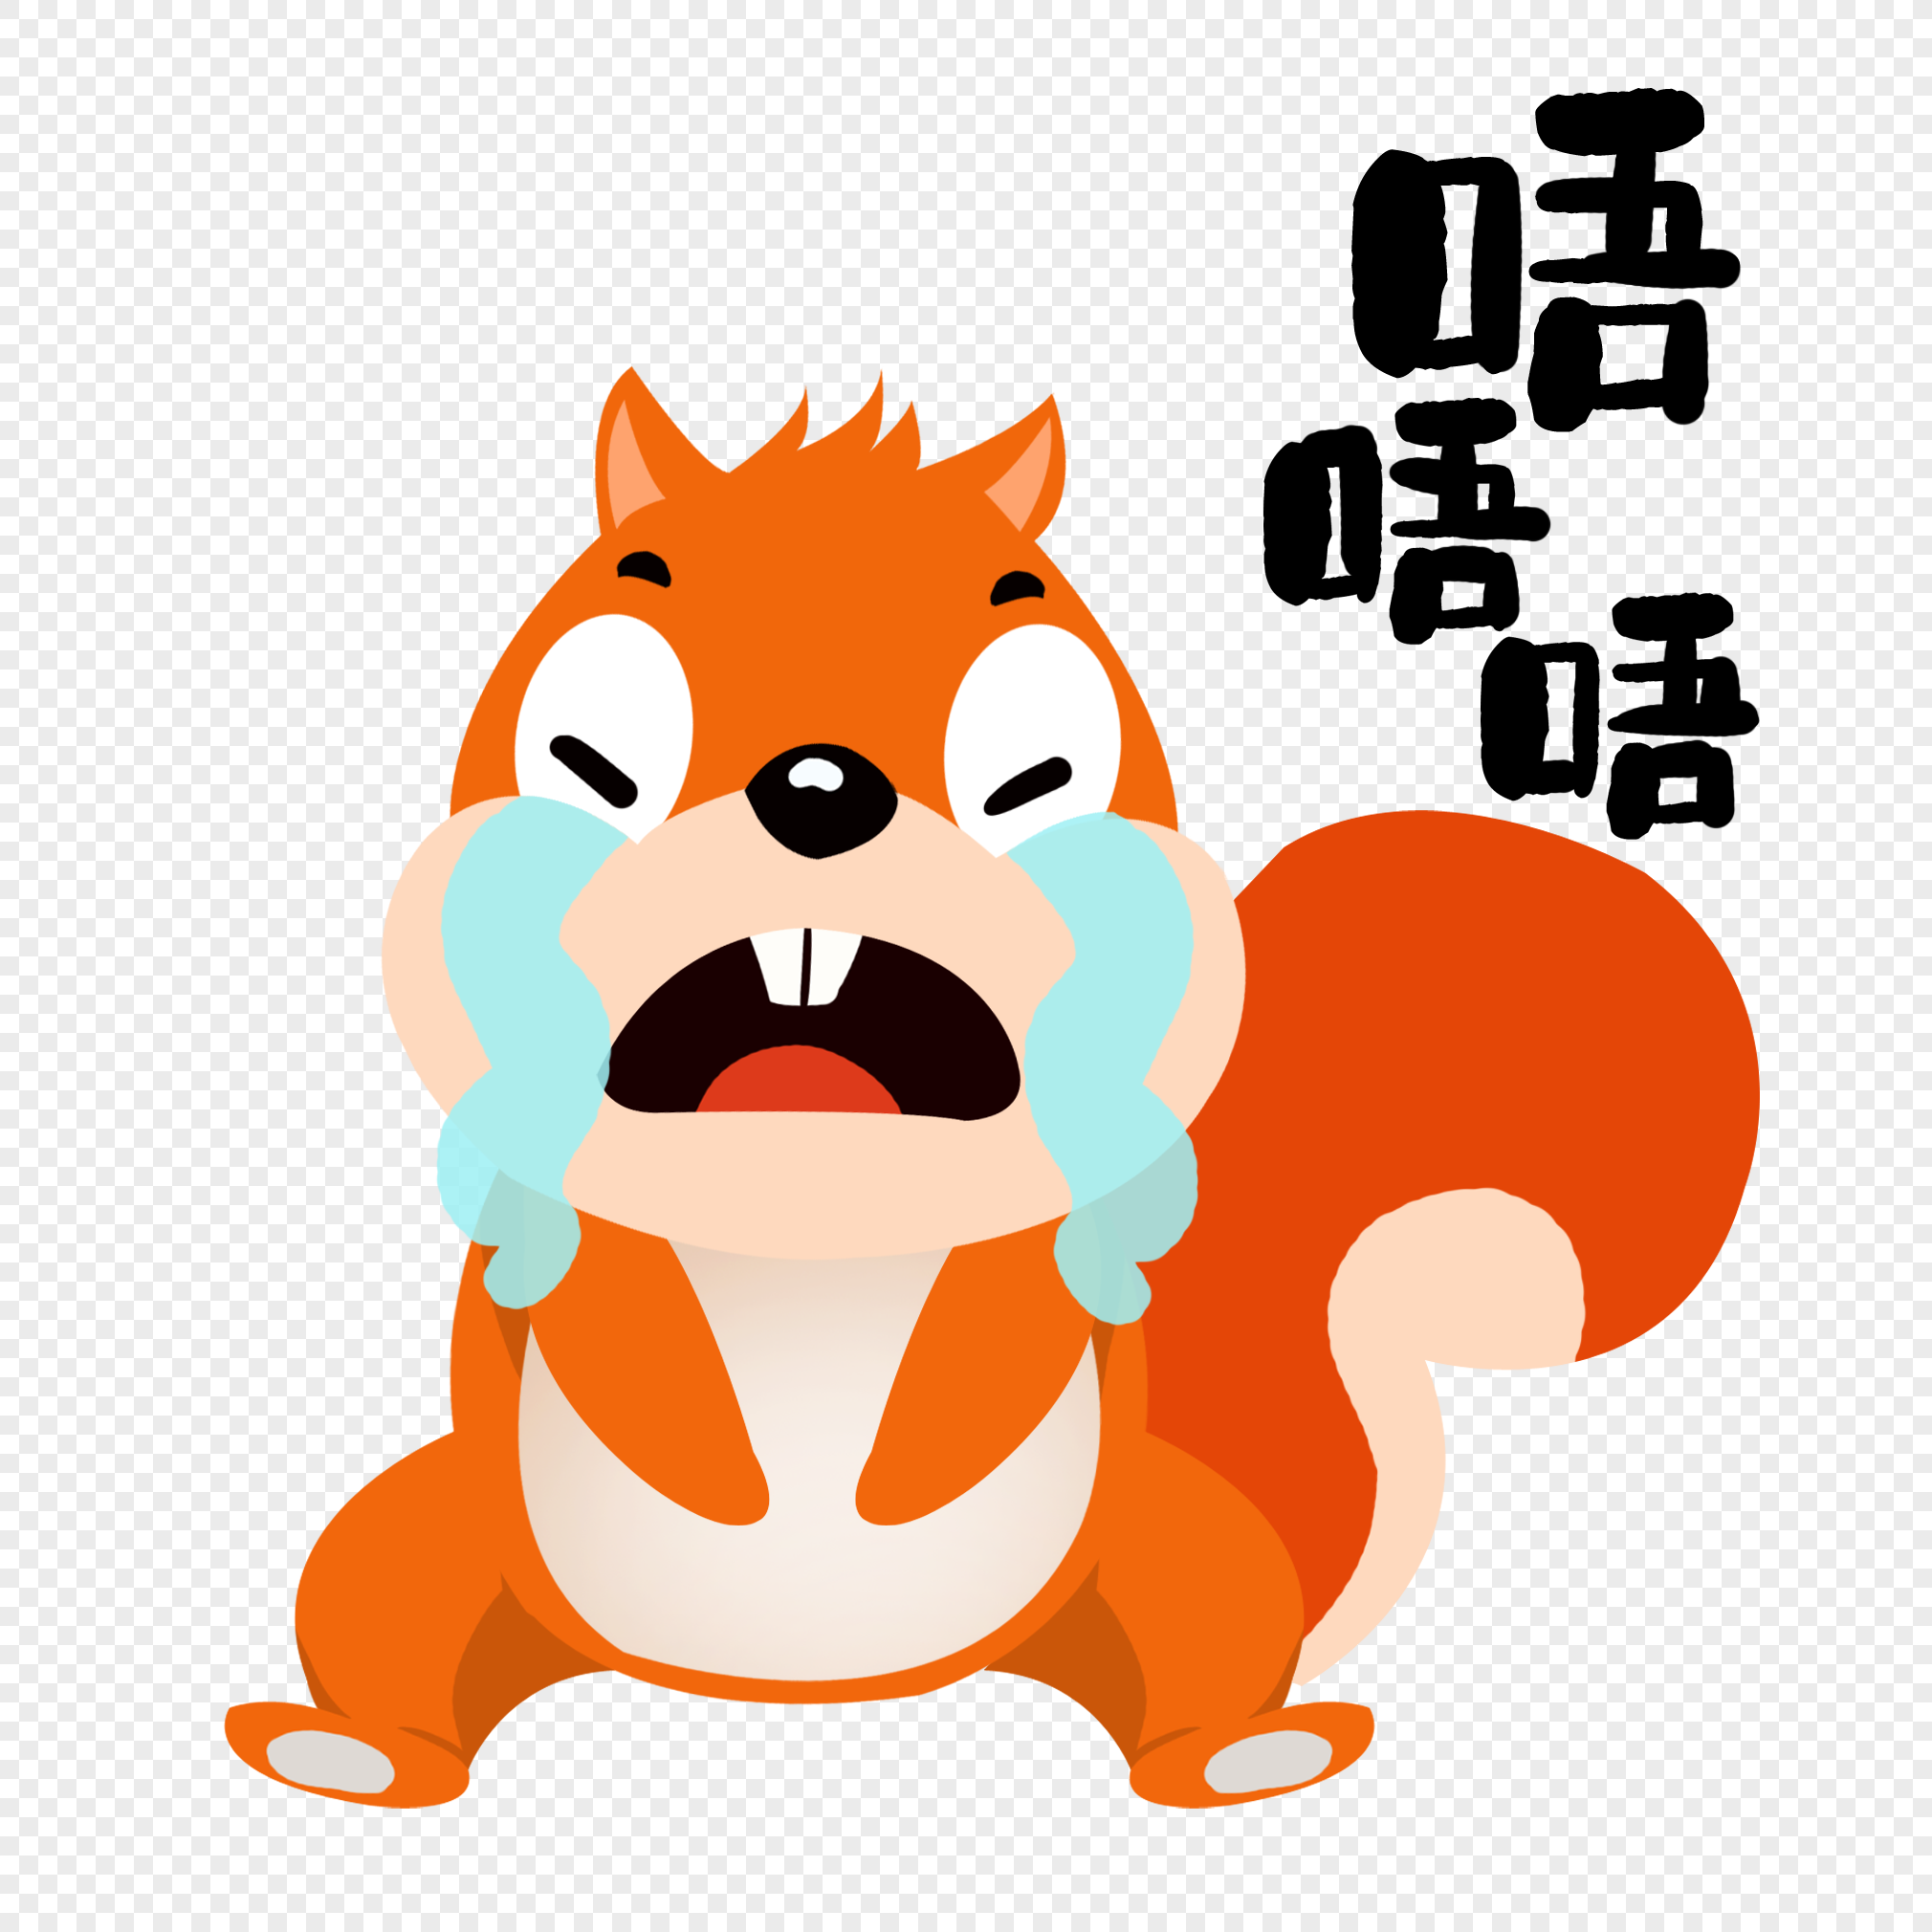 Cartoon Little Squirrel Crying PNG Image.